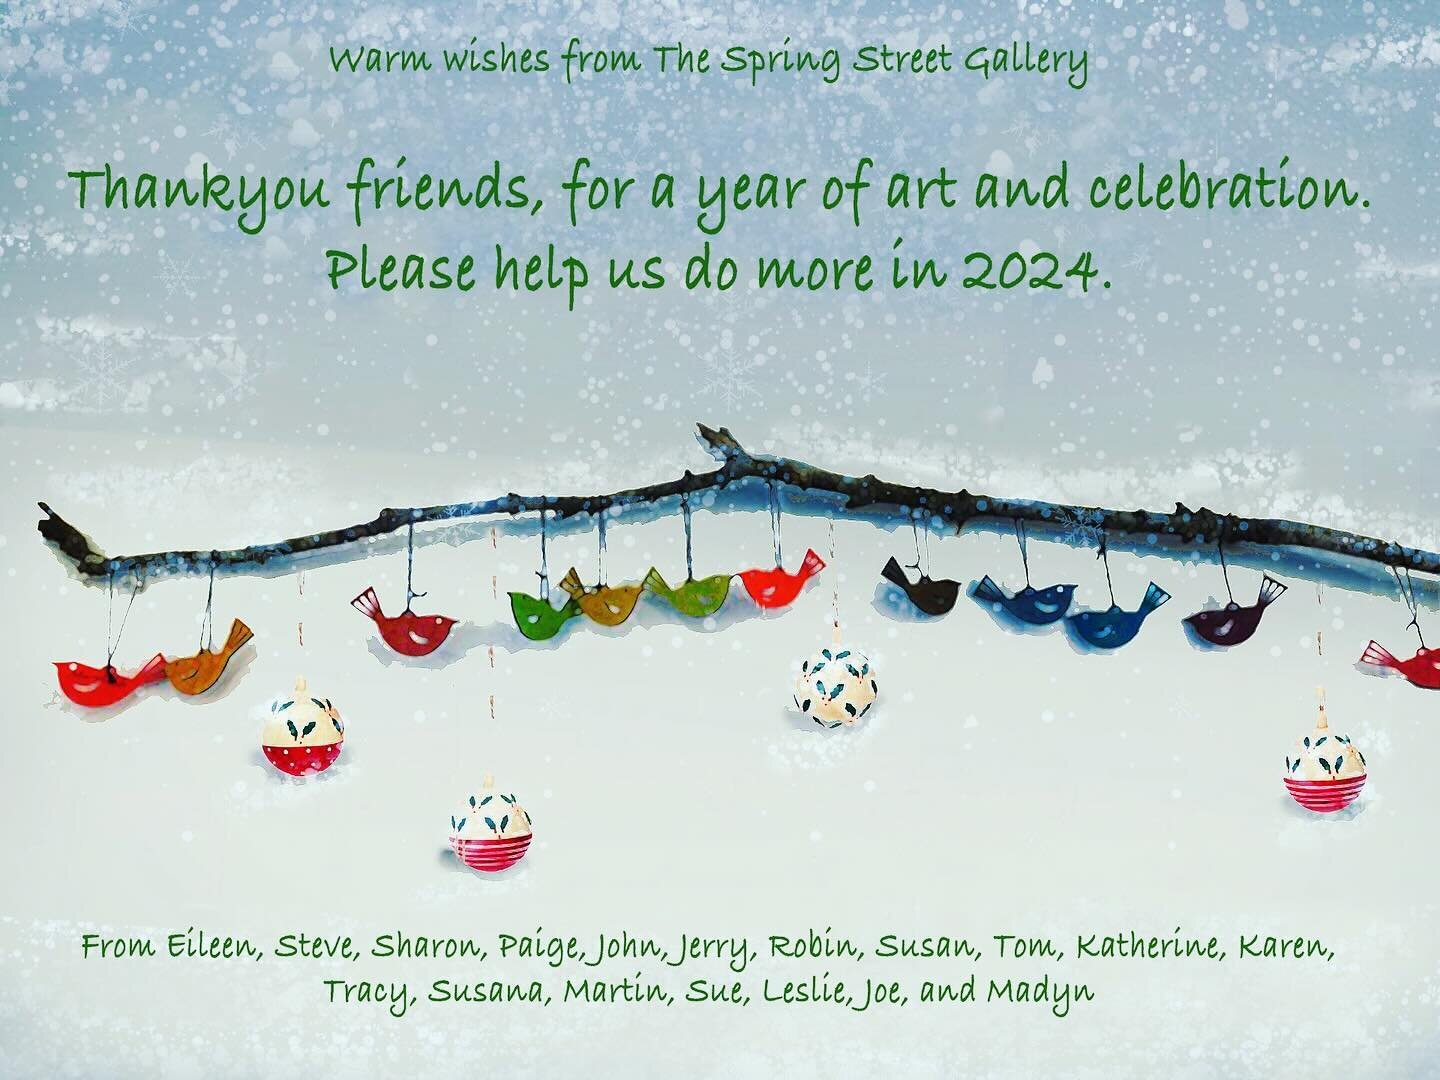 Become a Friend of Spring Street Gallery

Happy Holiday Greetings to all --

The Spring Street Gallery enjoyed a wonderful year in 2023. We continued to offer regular gatherings to celebrate our island and our art. We also welcomed new members, hoste